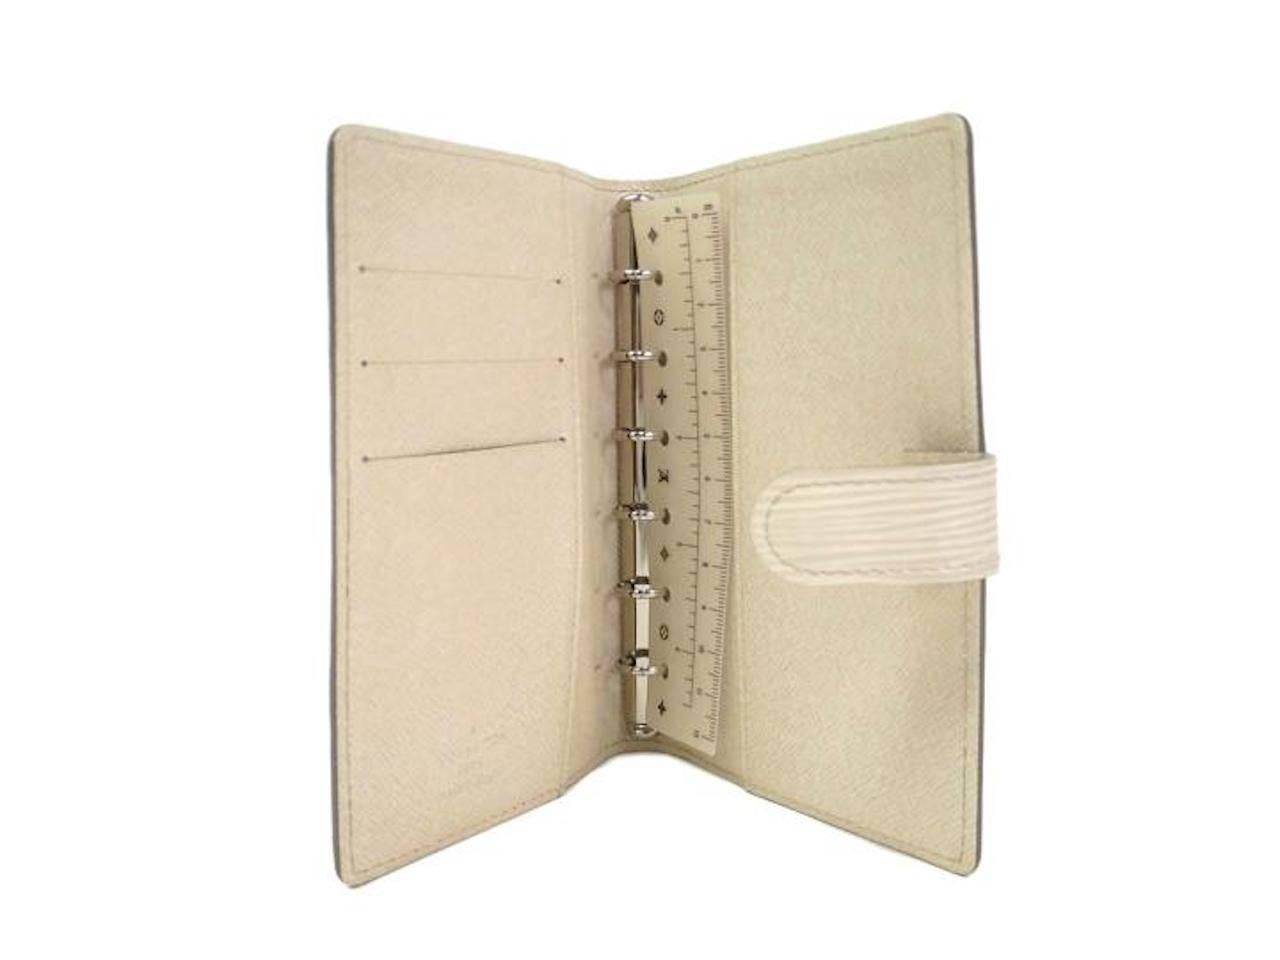 Beautiful, rich ivory agenda versatile enough to compliment any Louis Vuitton collection!

Epi leather
Silver hardware
Snap closure 
Made in Spain
Date code CA1097
Measures 4" W x 5.7" H 
Features two open pocket, pen holder and three card